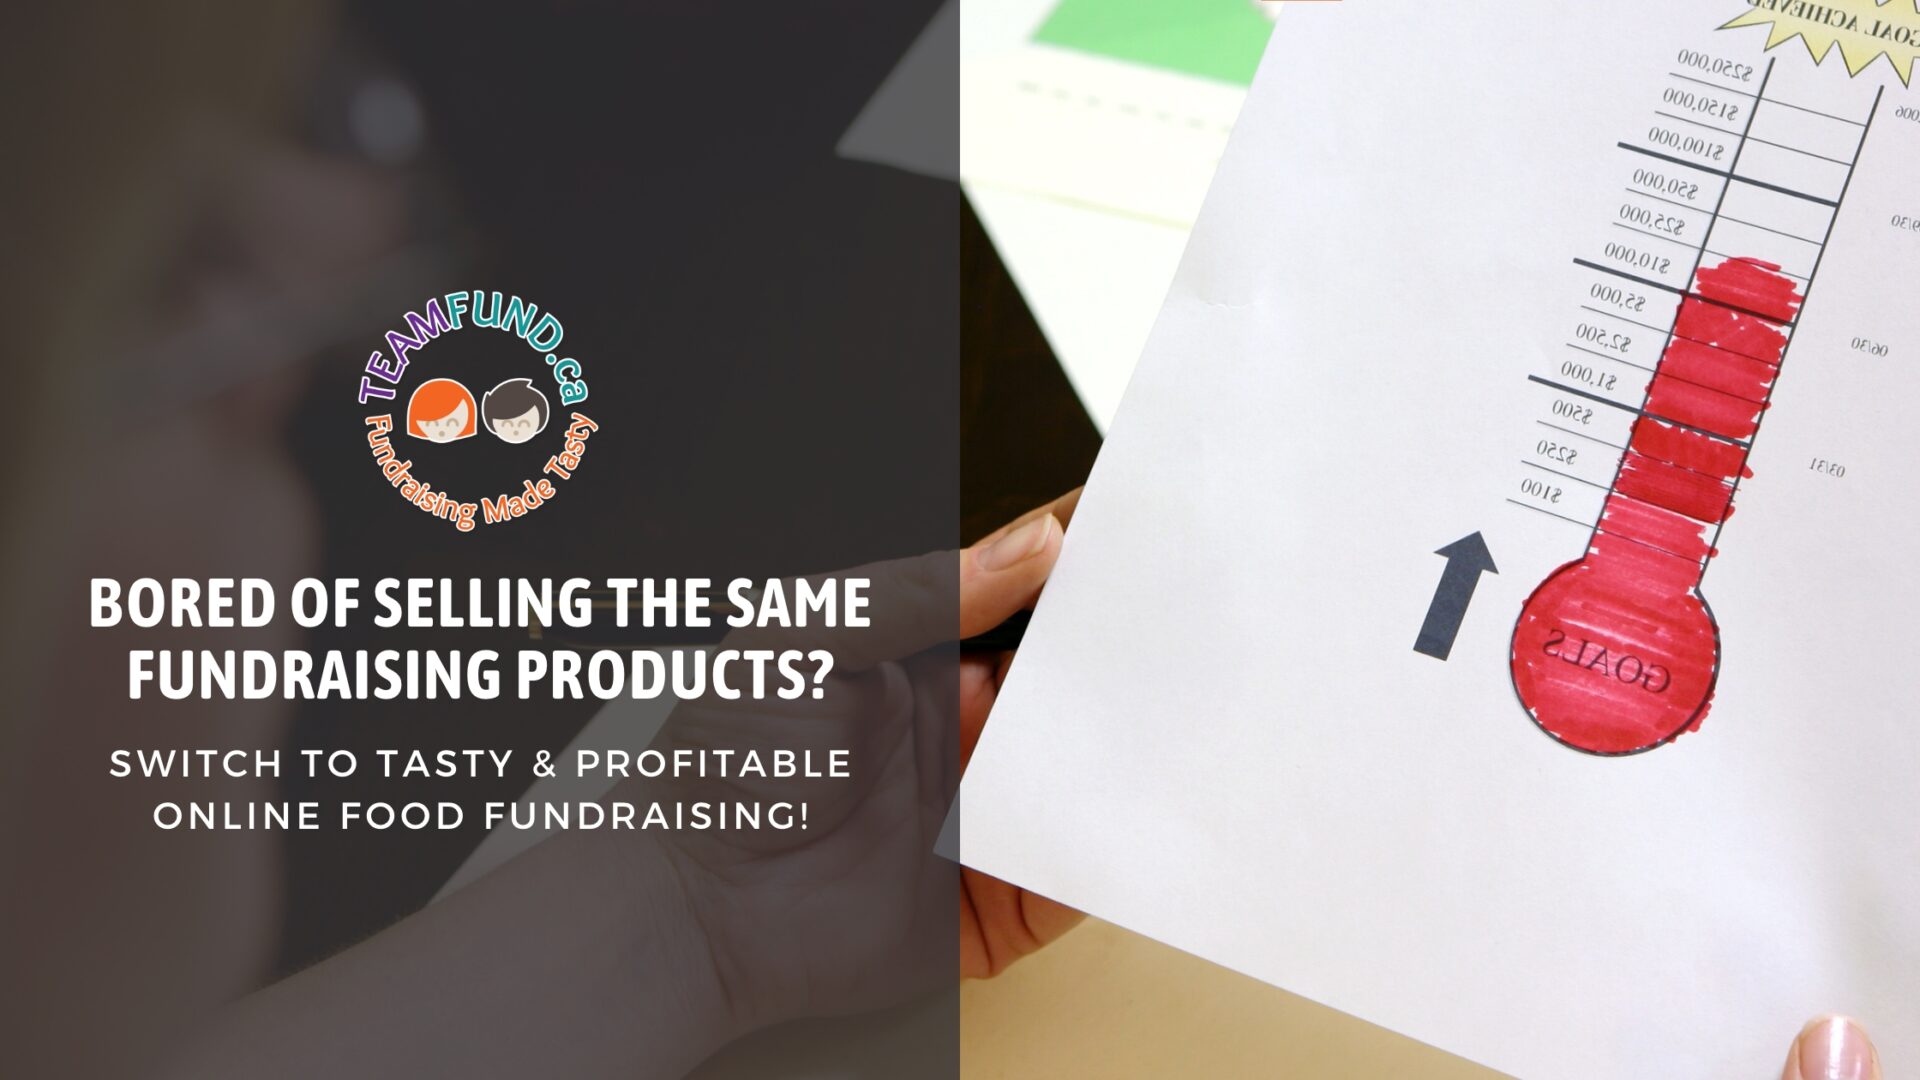 Bored of Bottle Drives and Raffles? Switch to Tasty and Profitable Online Food Fundraising!